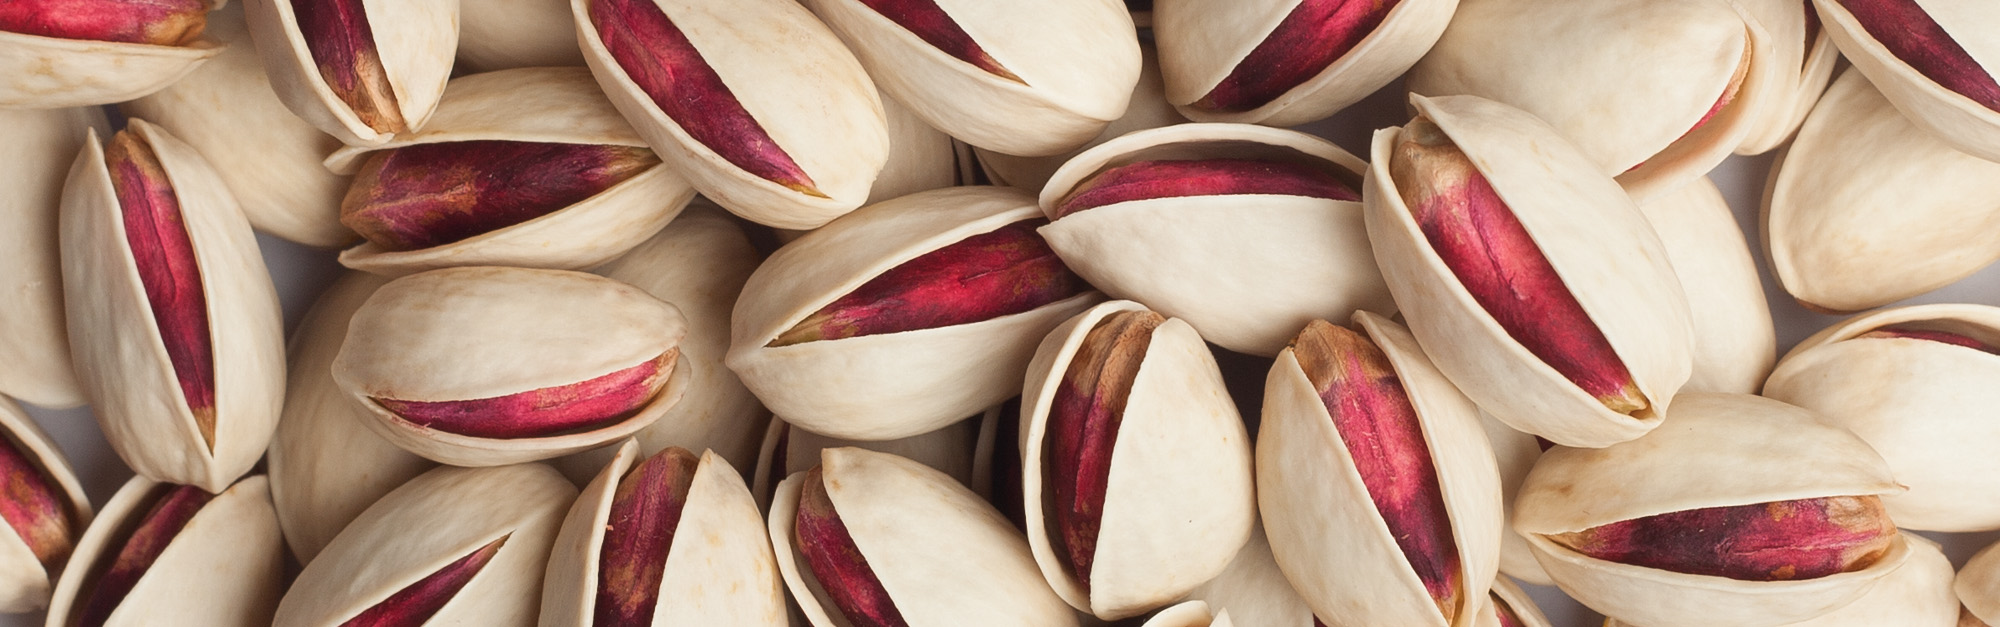 Pistachio Varieties and Packing